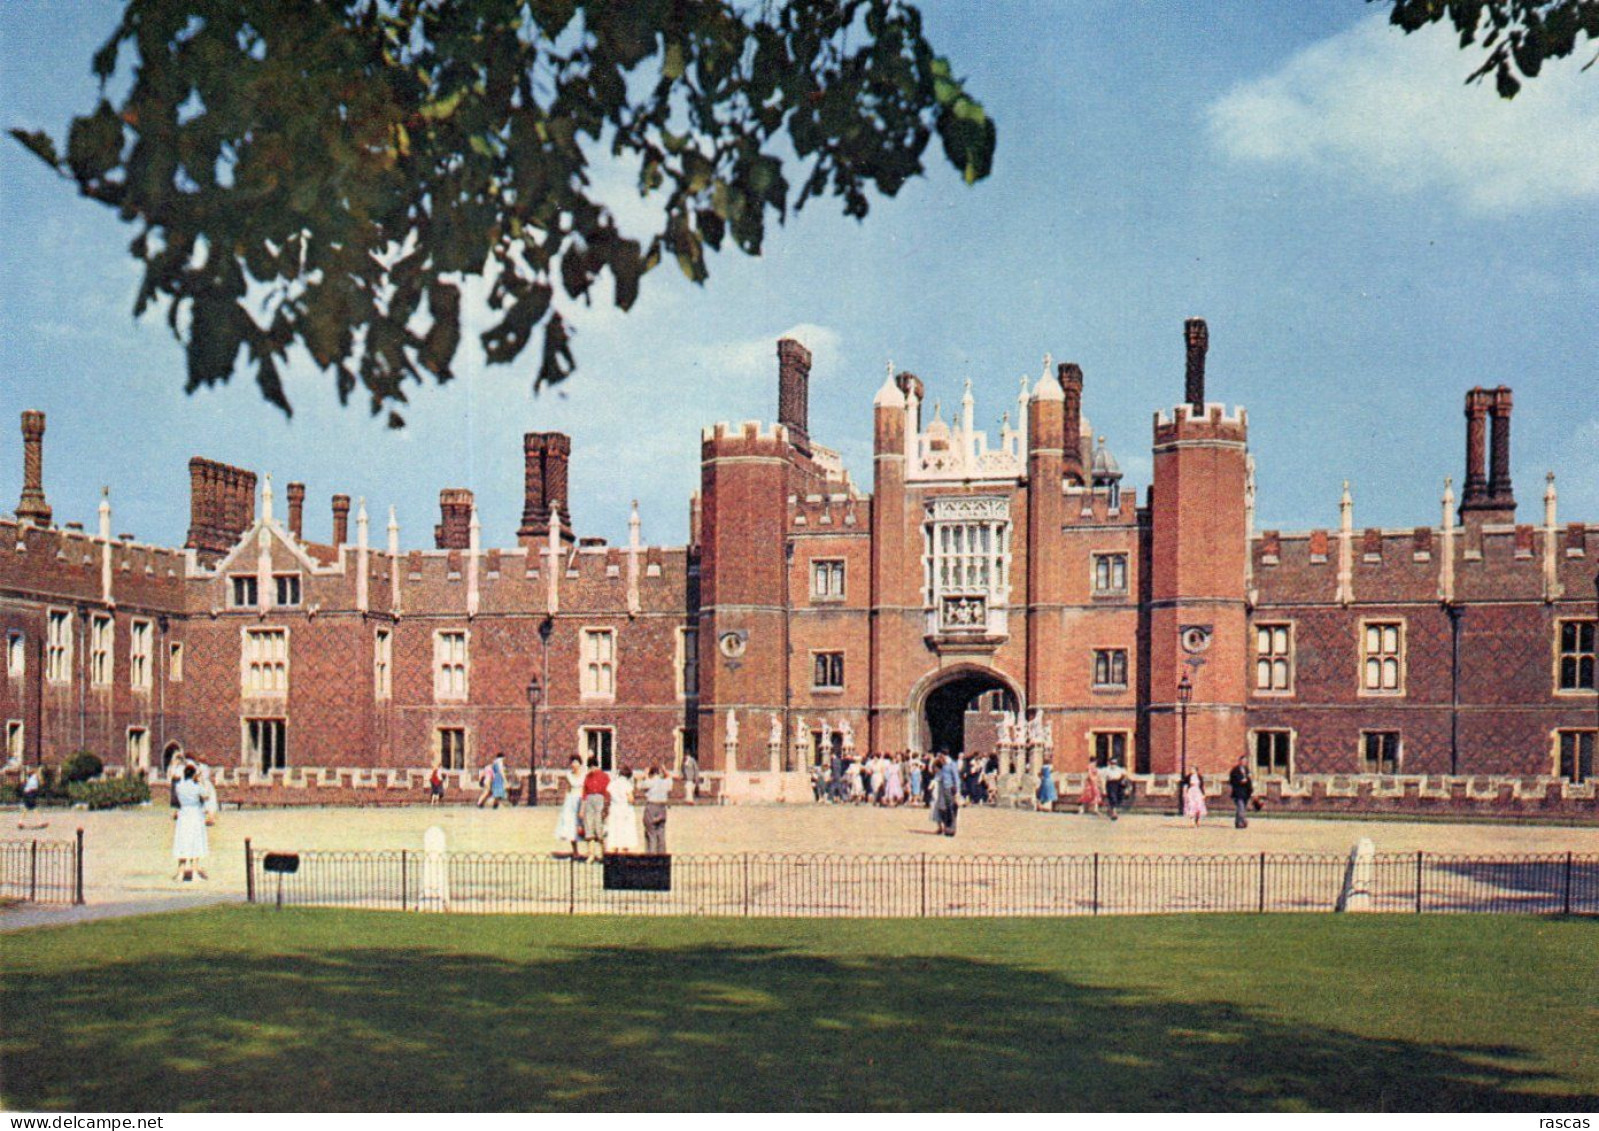 CPM - S - ANGLETERRE - MIDDLESEX - HAMPTON COURT PALACE - THE GREAT GATEHOUSE AND MOAT BRIDGE - WEST FRONT - Middlesex